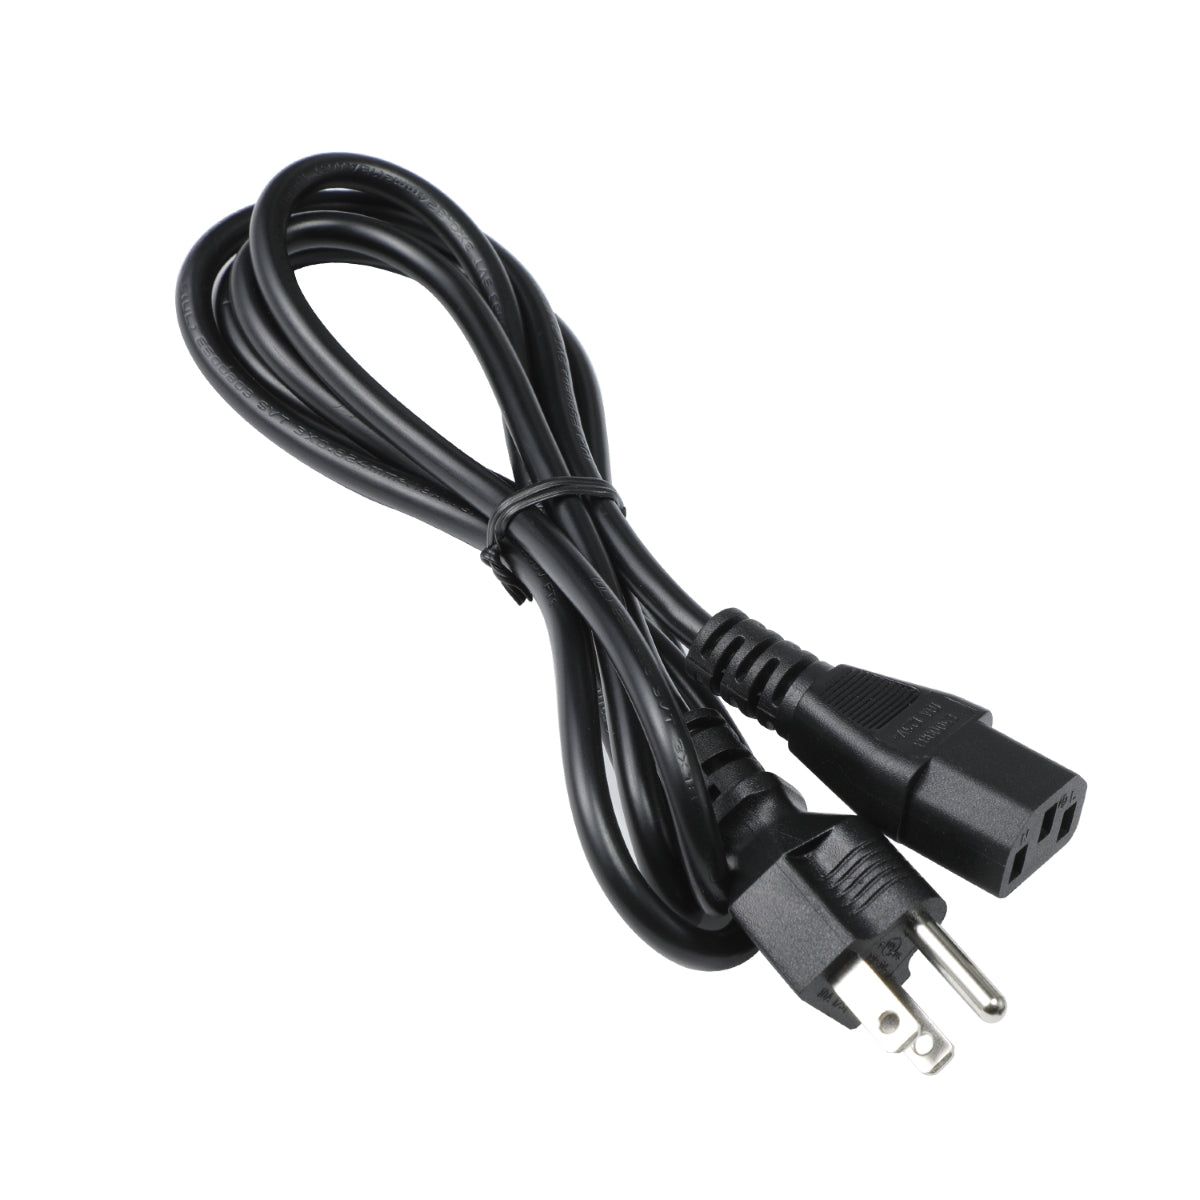 Power Cable for Philips 346E2CTAA/27 UltraWide LCD Monitor.